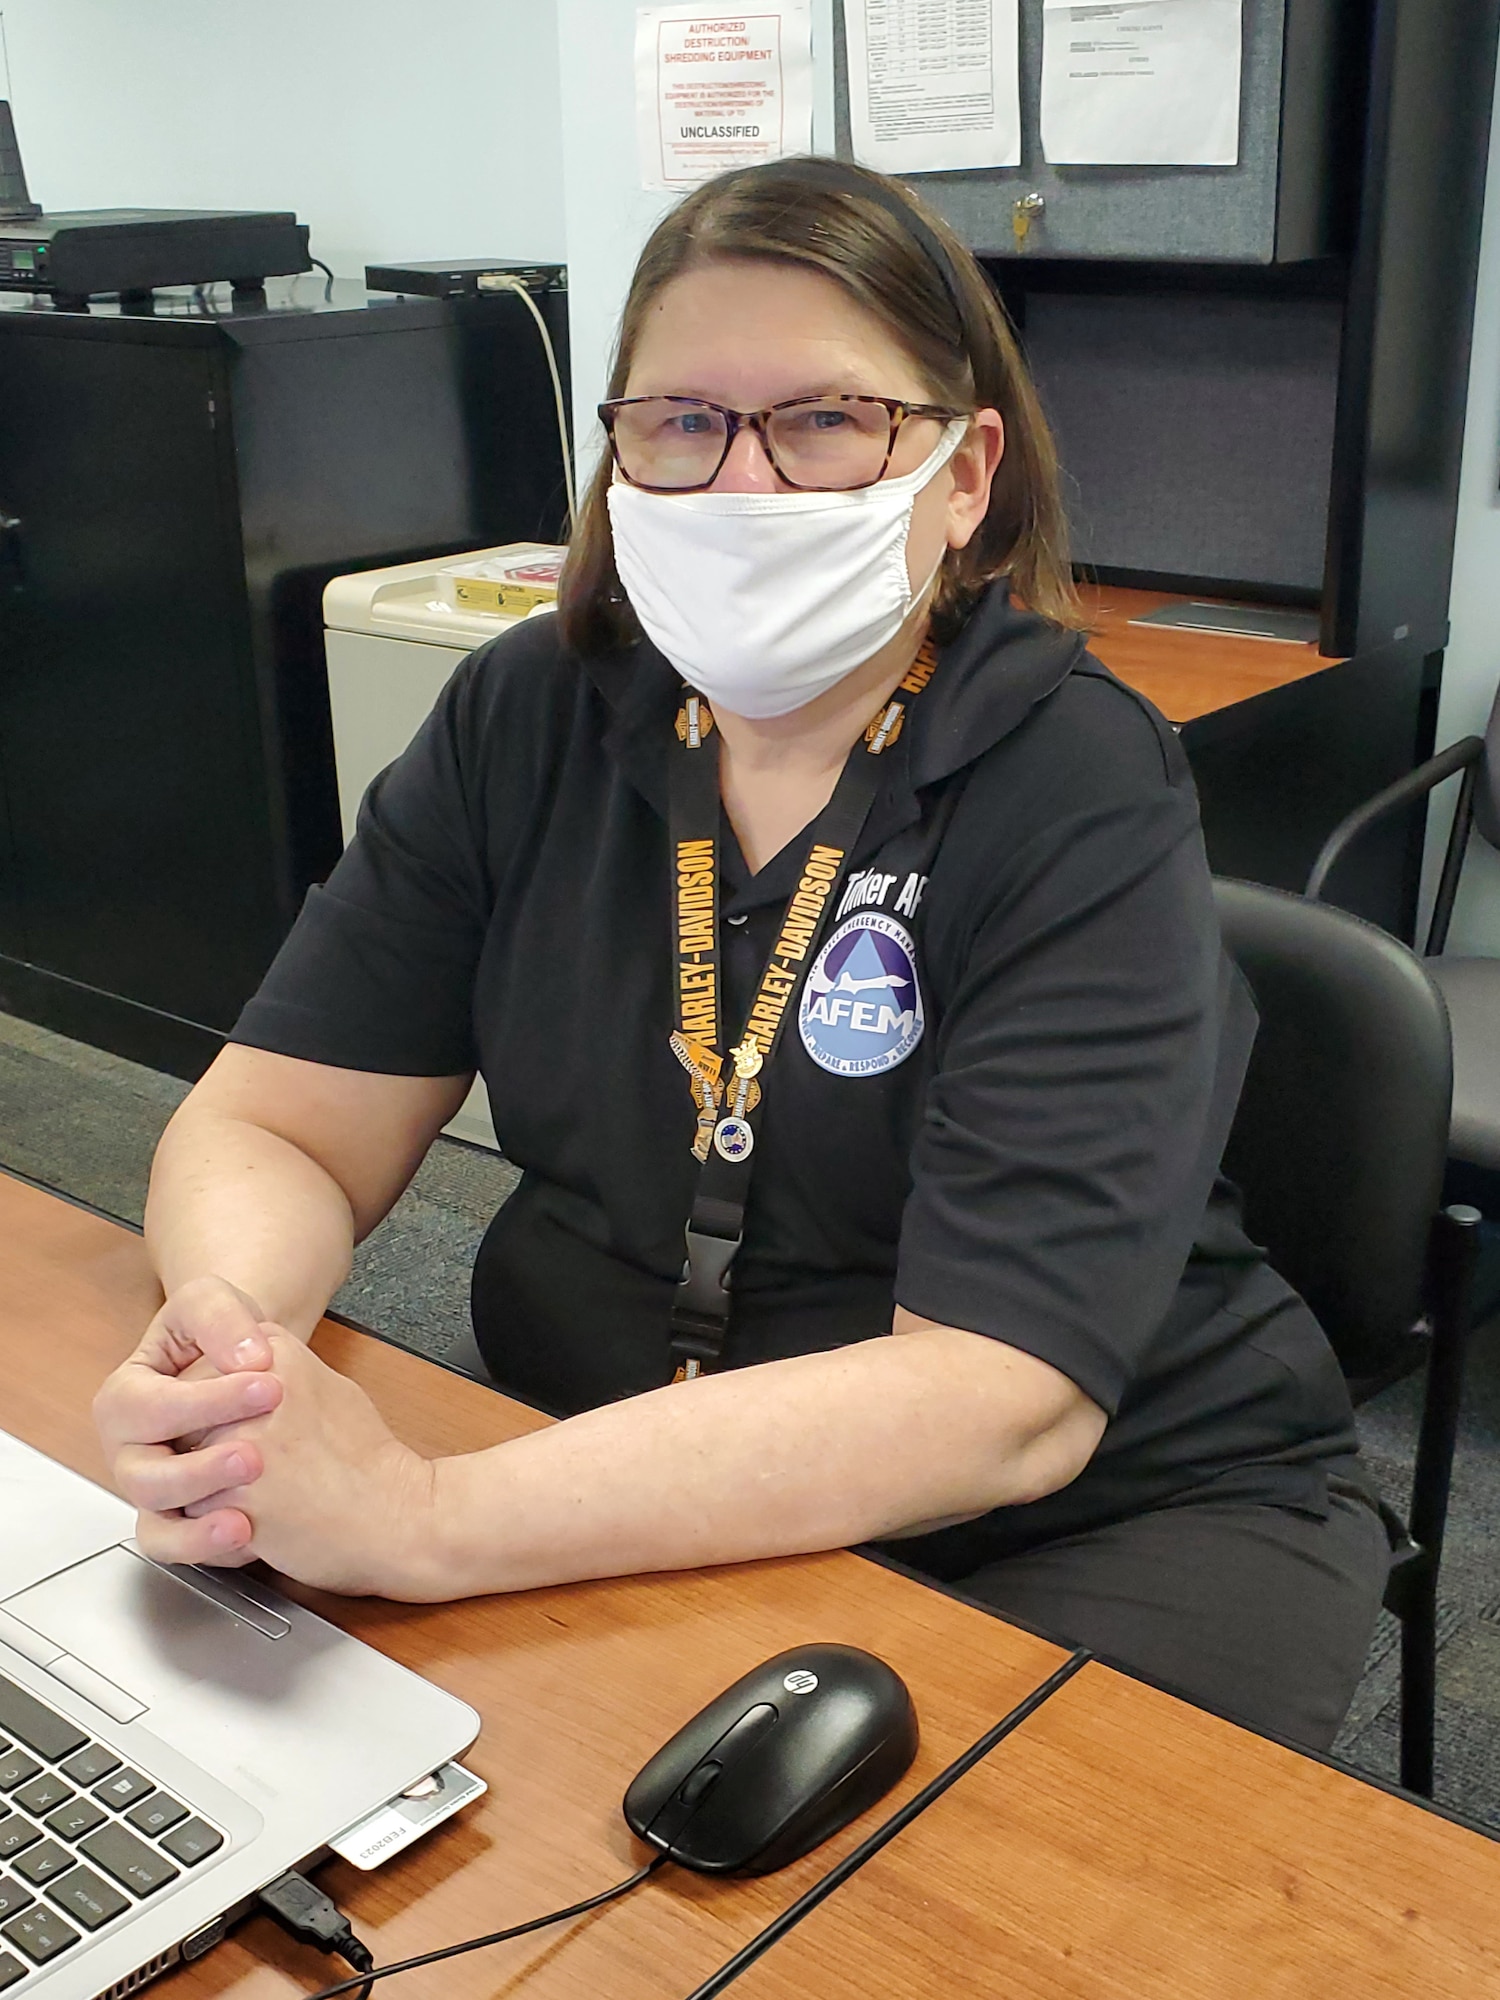 Diann Riter is the Installation Emergency Manager at the Emergency Operations Center and has served in this position for over seven years. She also served 16 years civil service and is an Air Force retiree.